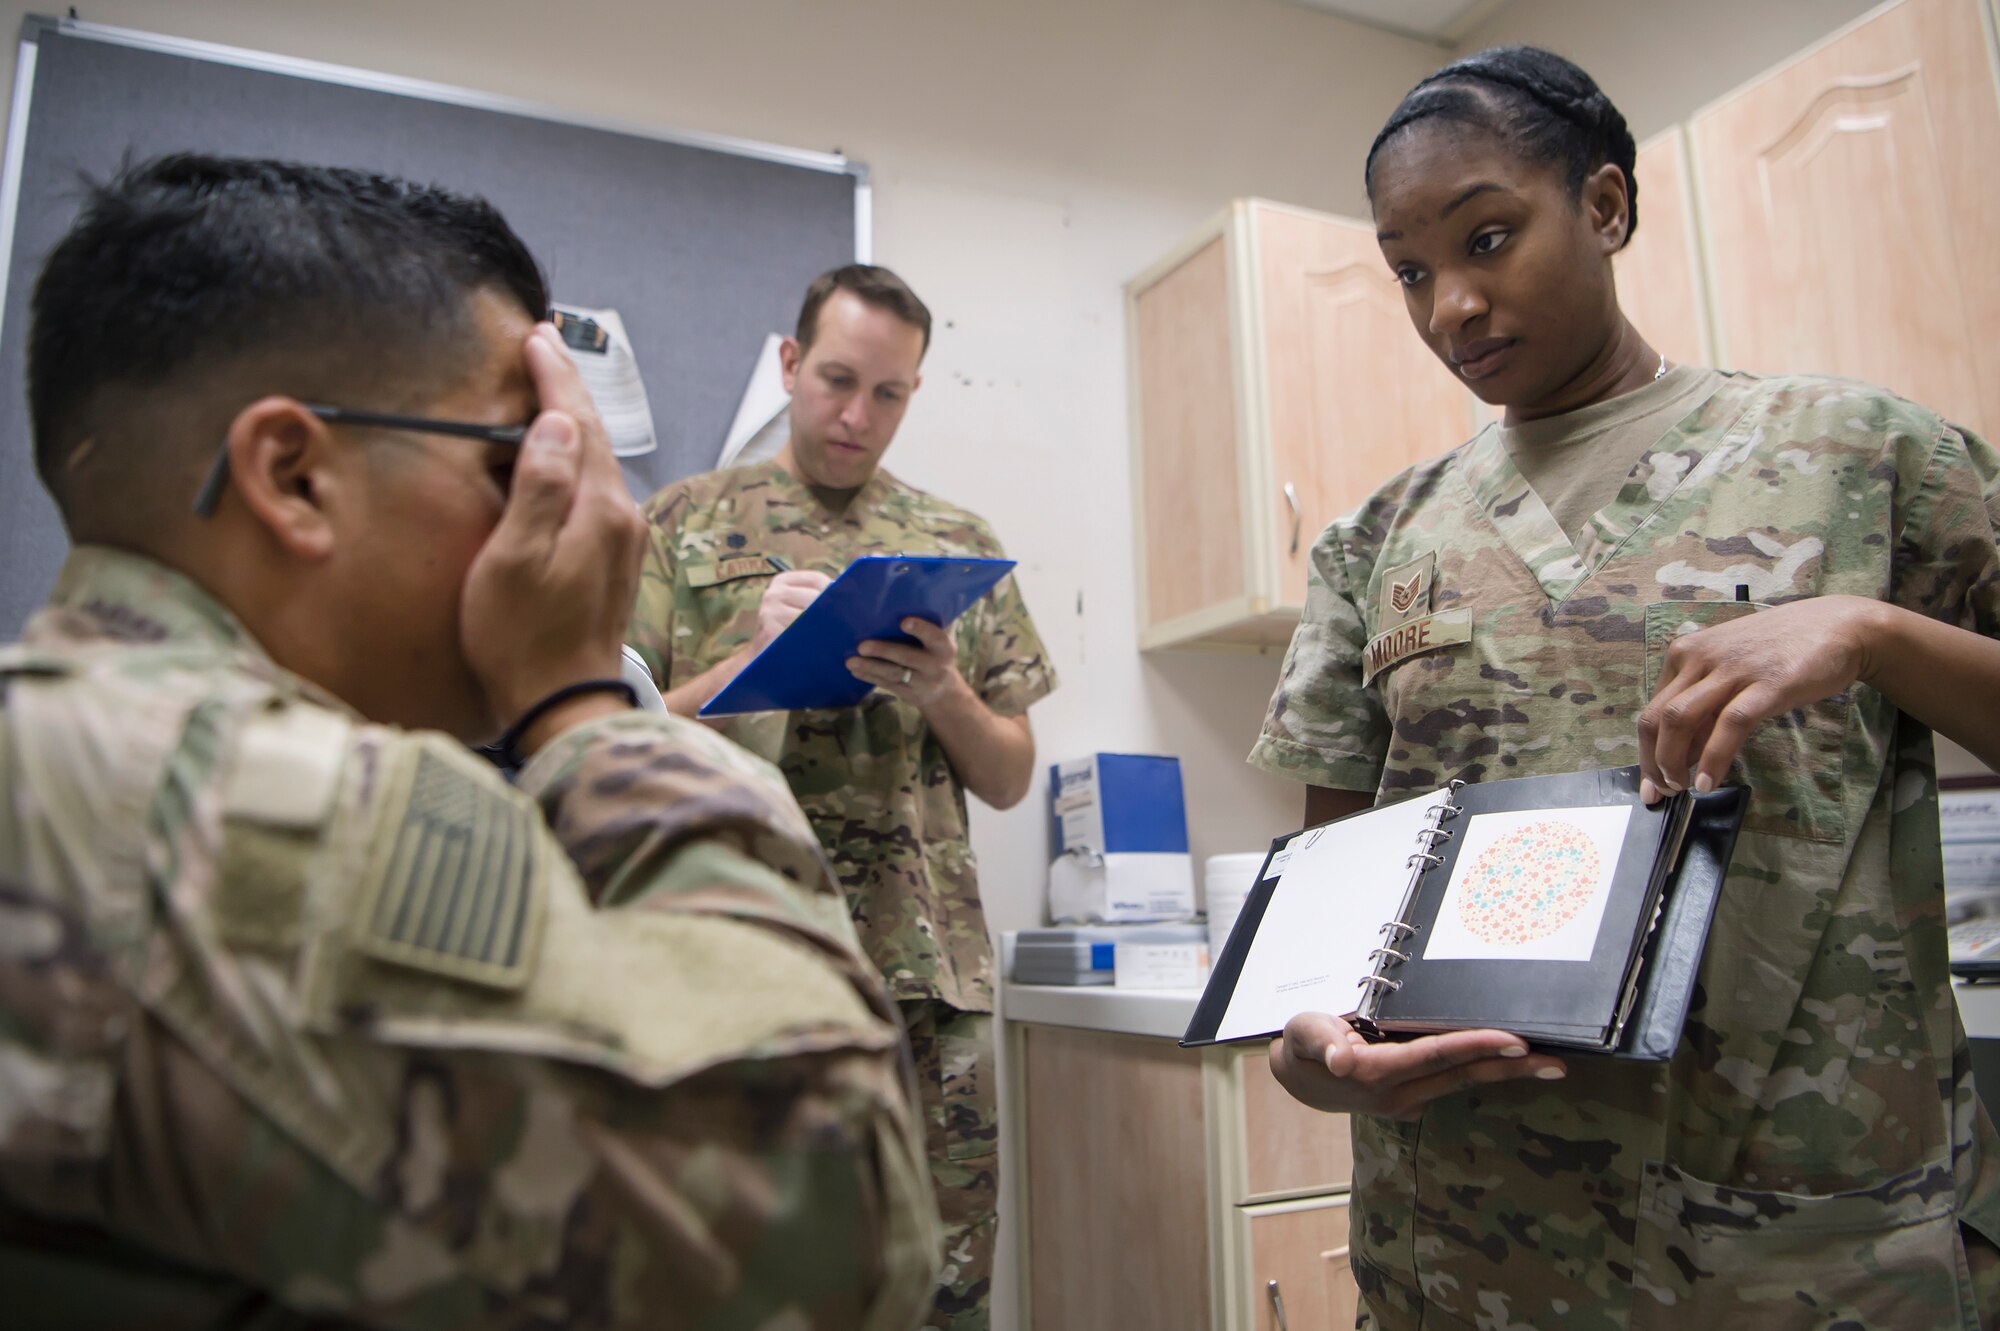 U.S. Air Force Tech. Sgt. Marquita Moore, right, 379th Expeditionary Medical Group (EMDG) optometry NCO in charge from Al Udeid Air Base (AUAB), Qatar, conducts an eye exam for a U.S. Army Soldier as U.S. Air Force Lt. Col. Peter Carra, 379th EMDG optometry officer in charge, documents data March 9, 2019, at Camp As Sayliyah (CAS), Qatar. Moore and Carra travel to CAS once a week to provide eye care for Soldiers who, in turn, fabricate glasses prescribed for Airmen at AUAB and servicemembers at other deployed locations throughout U.S. Central Command.  (U.S. Air Force photo by Tech. Sgt. Christopher Hubenthal)